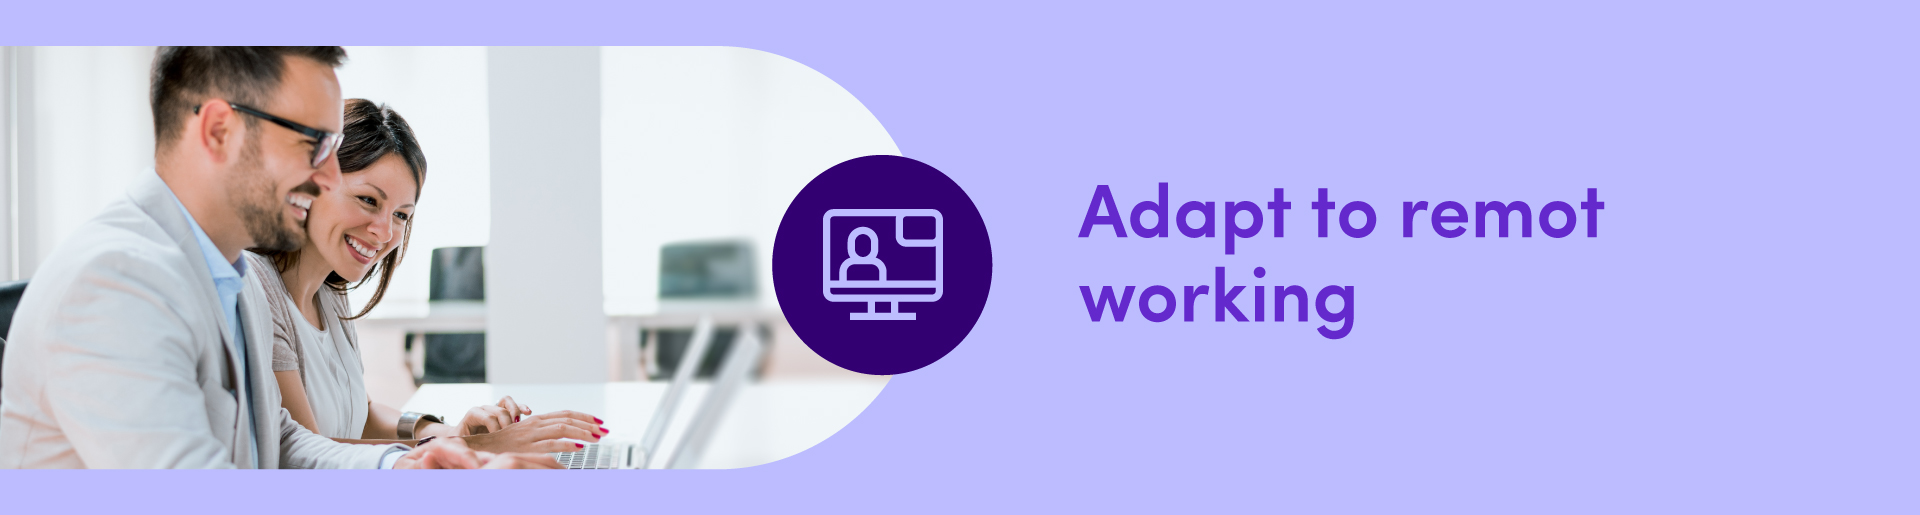 9-Adapt-to-remote-working